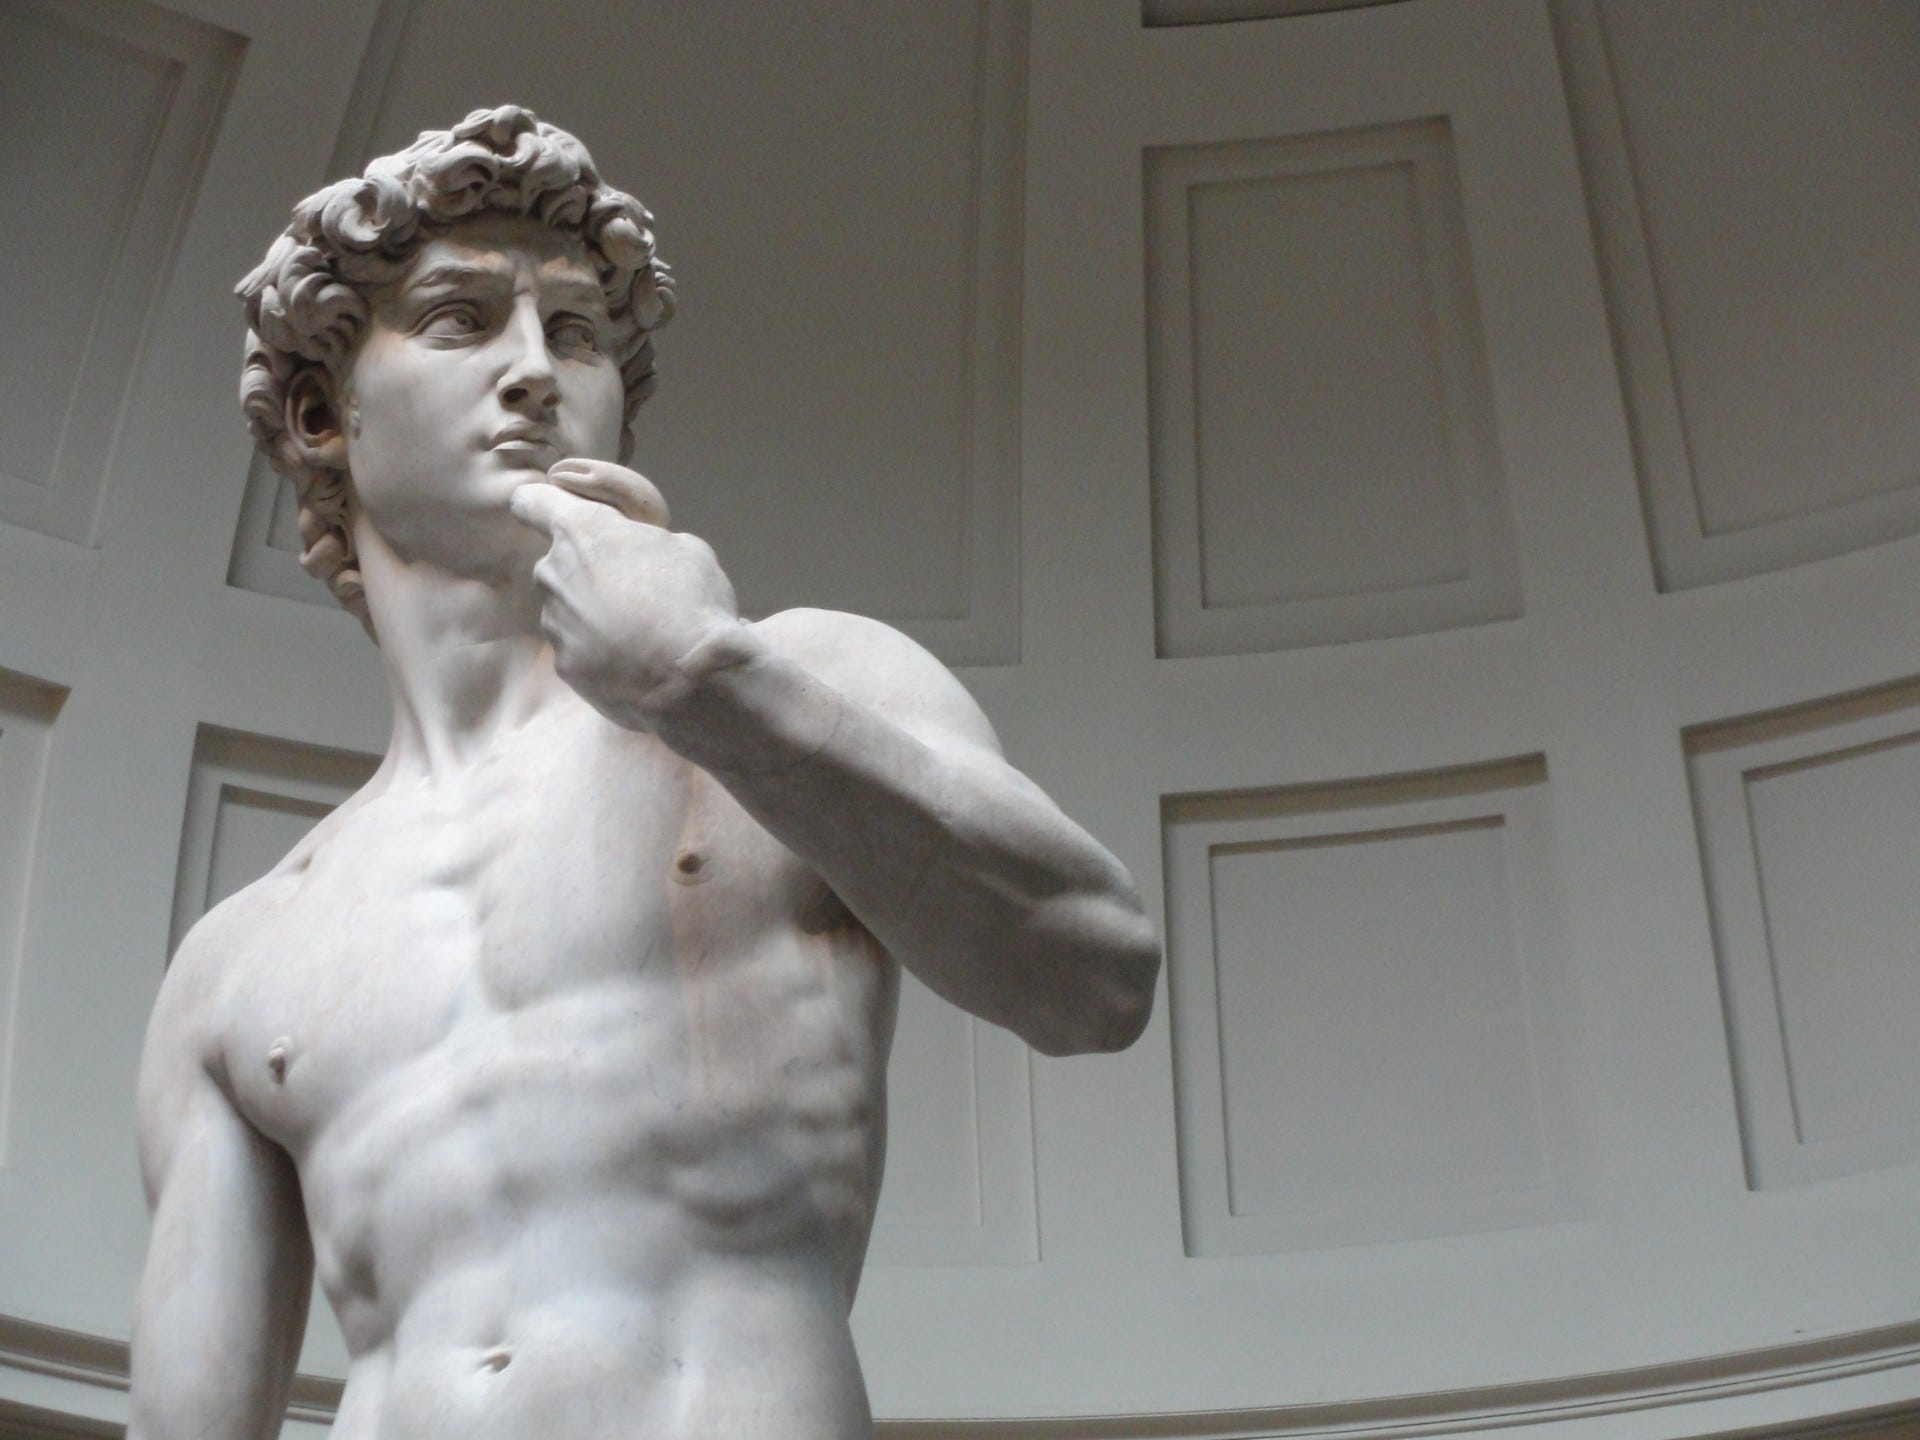 Today in History, September 1504: Michelangelo's David statue unveiled